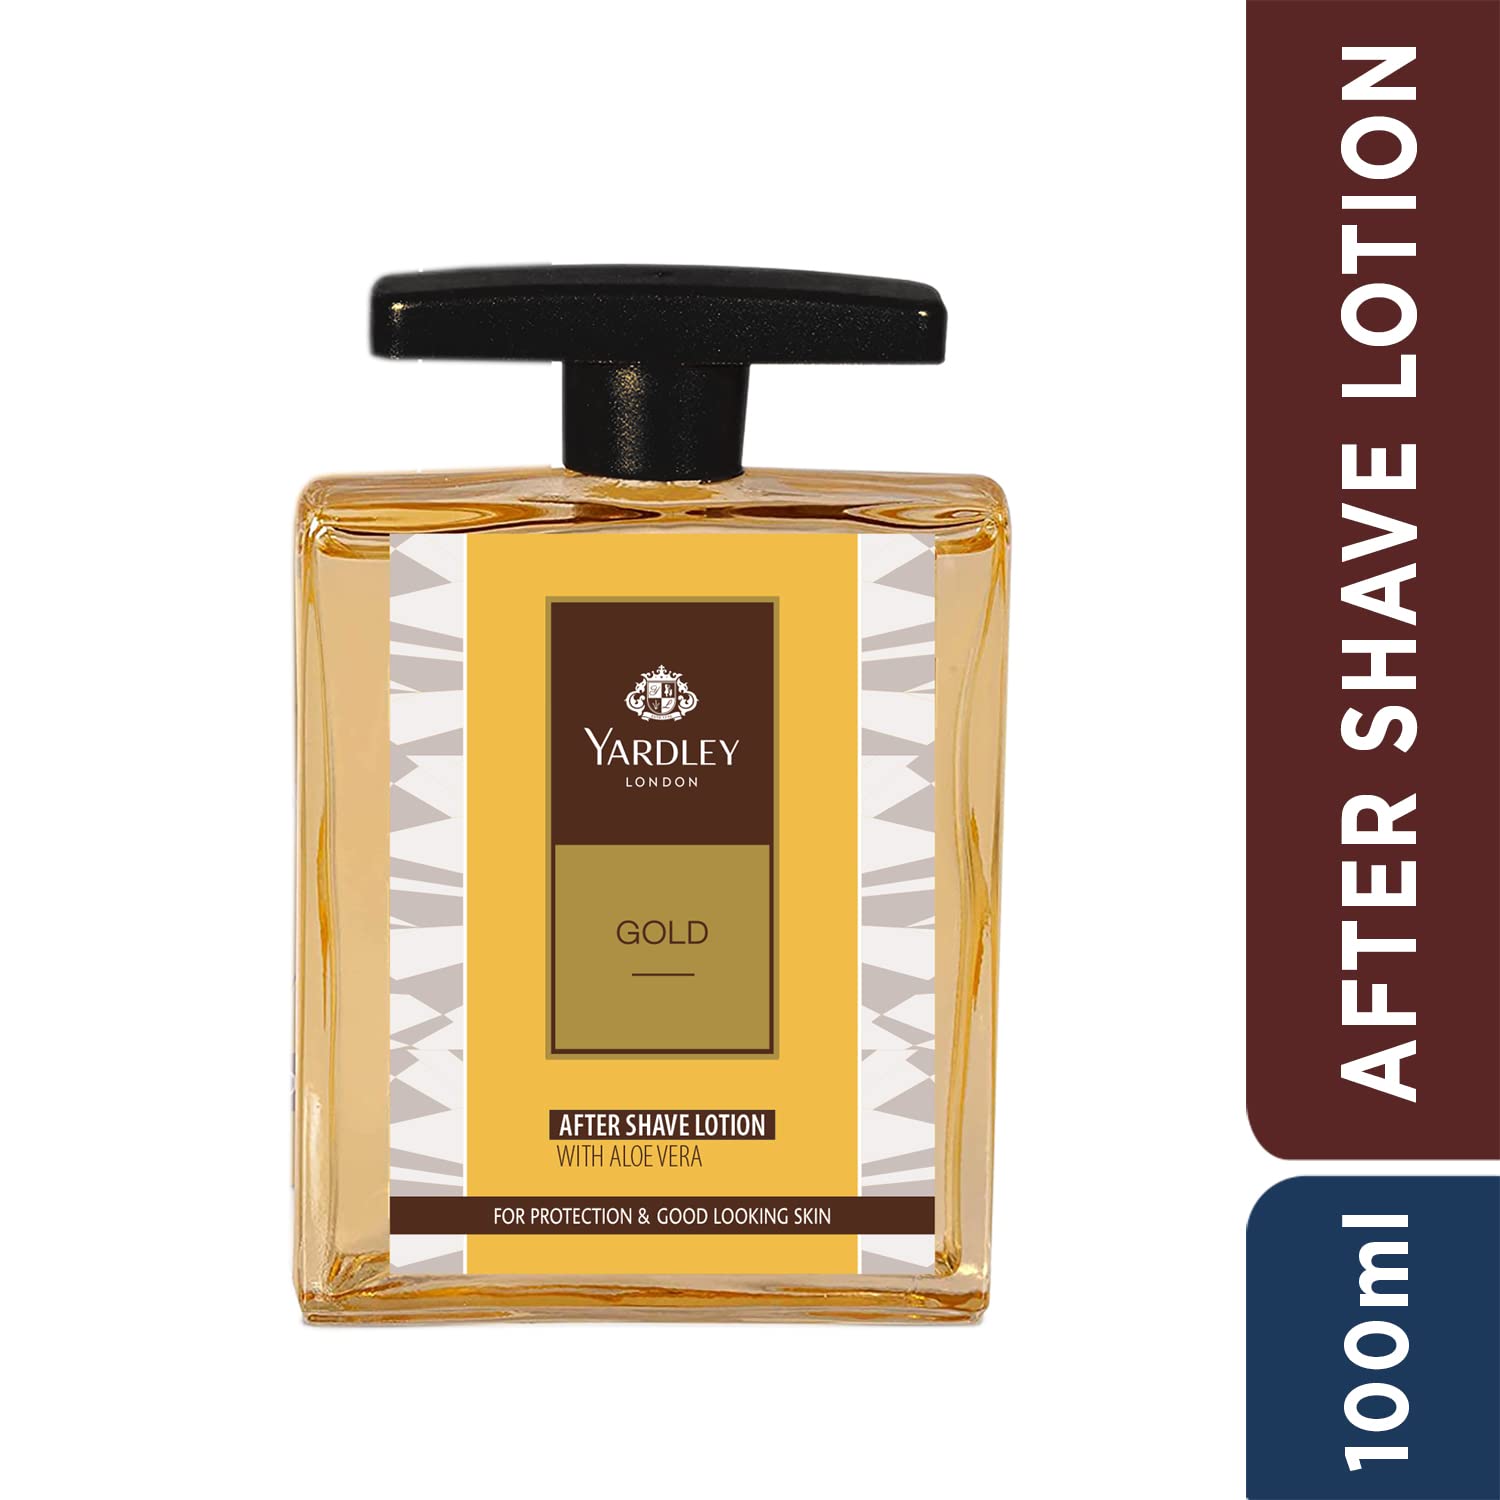 Yardley London Gold After Shave Lotion with Aloe Vera| Daily Use After Shave Lotion for Men| For Protected & Good Looking Skin| 100ml